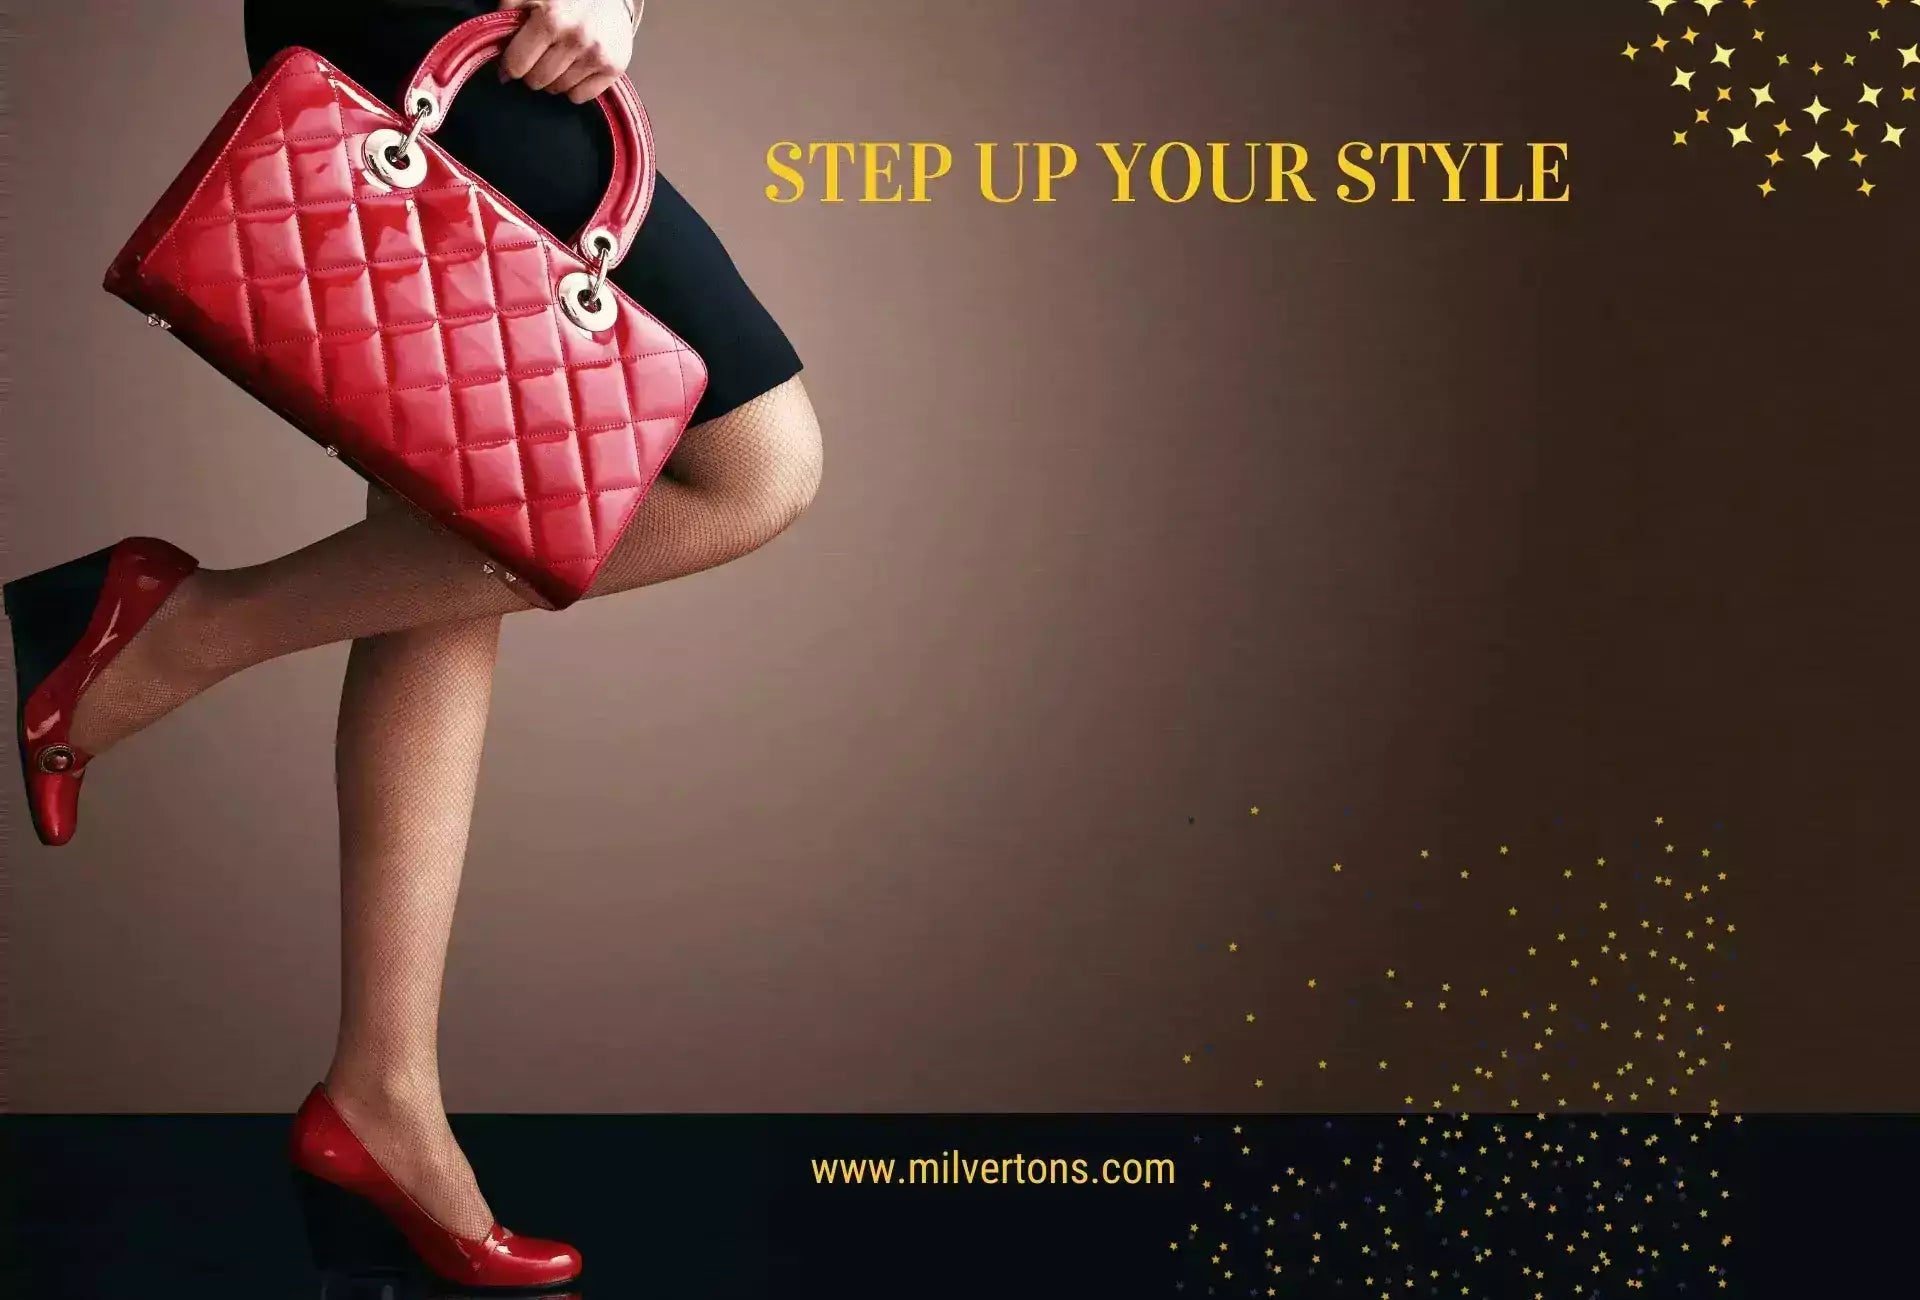 Shop Shoes, Bags, Clothing and Accessories - Milvertons